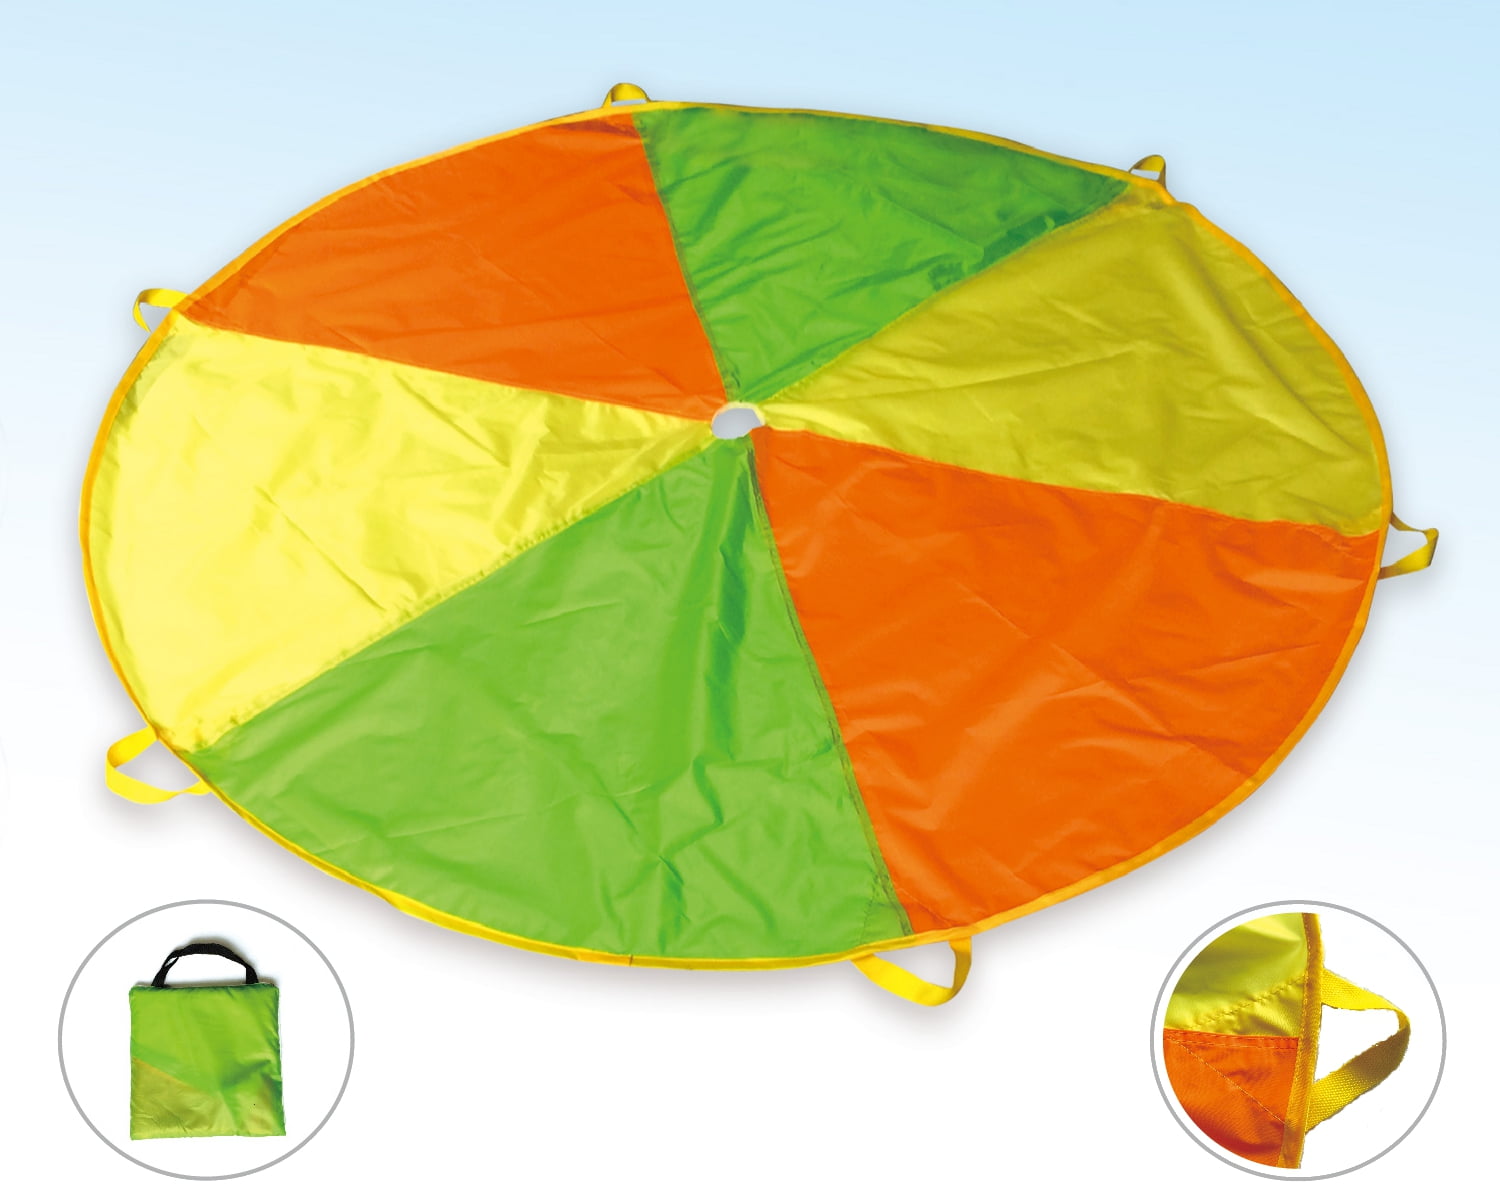 Details about   POCO DIVO 12-Foot Play Parachute Kids Canopy Children Wind Tent With 8 Handles 